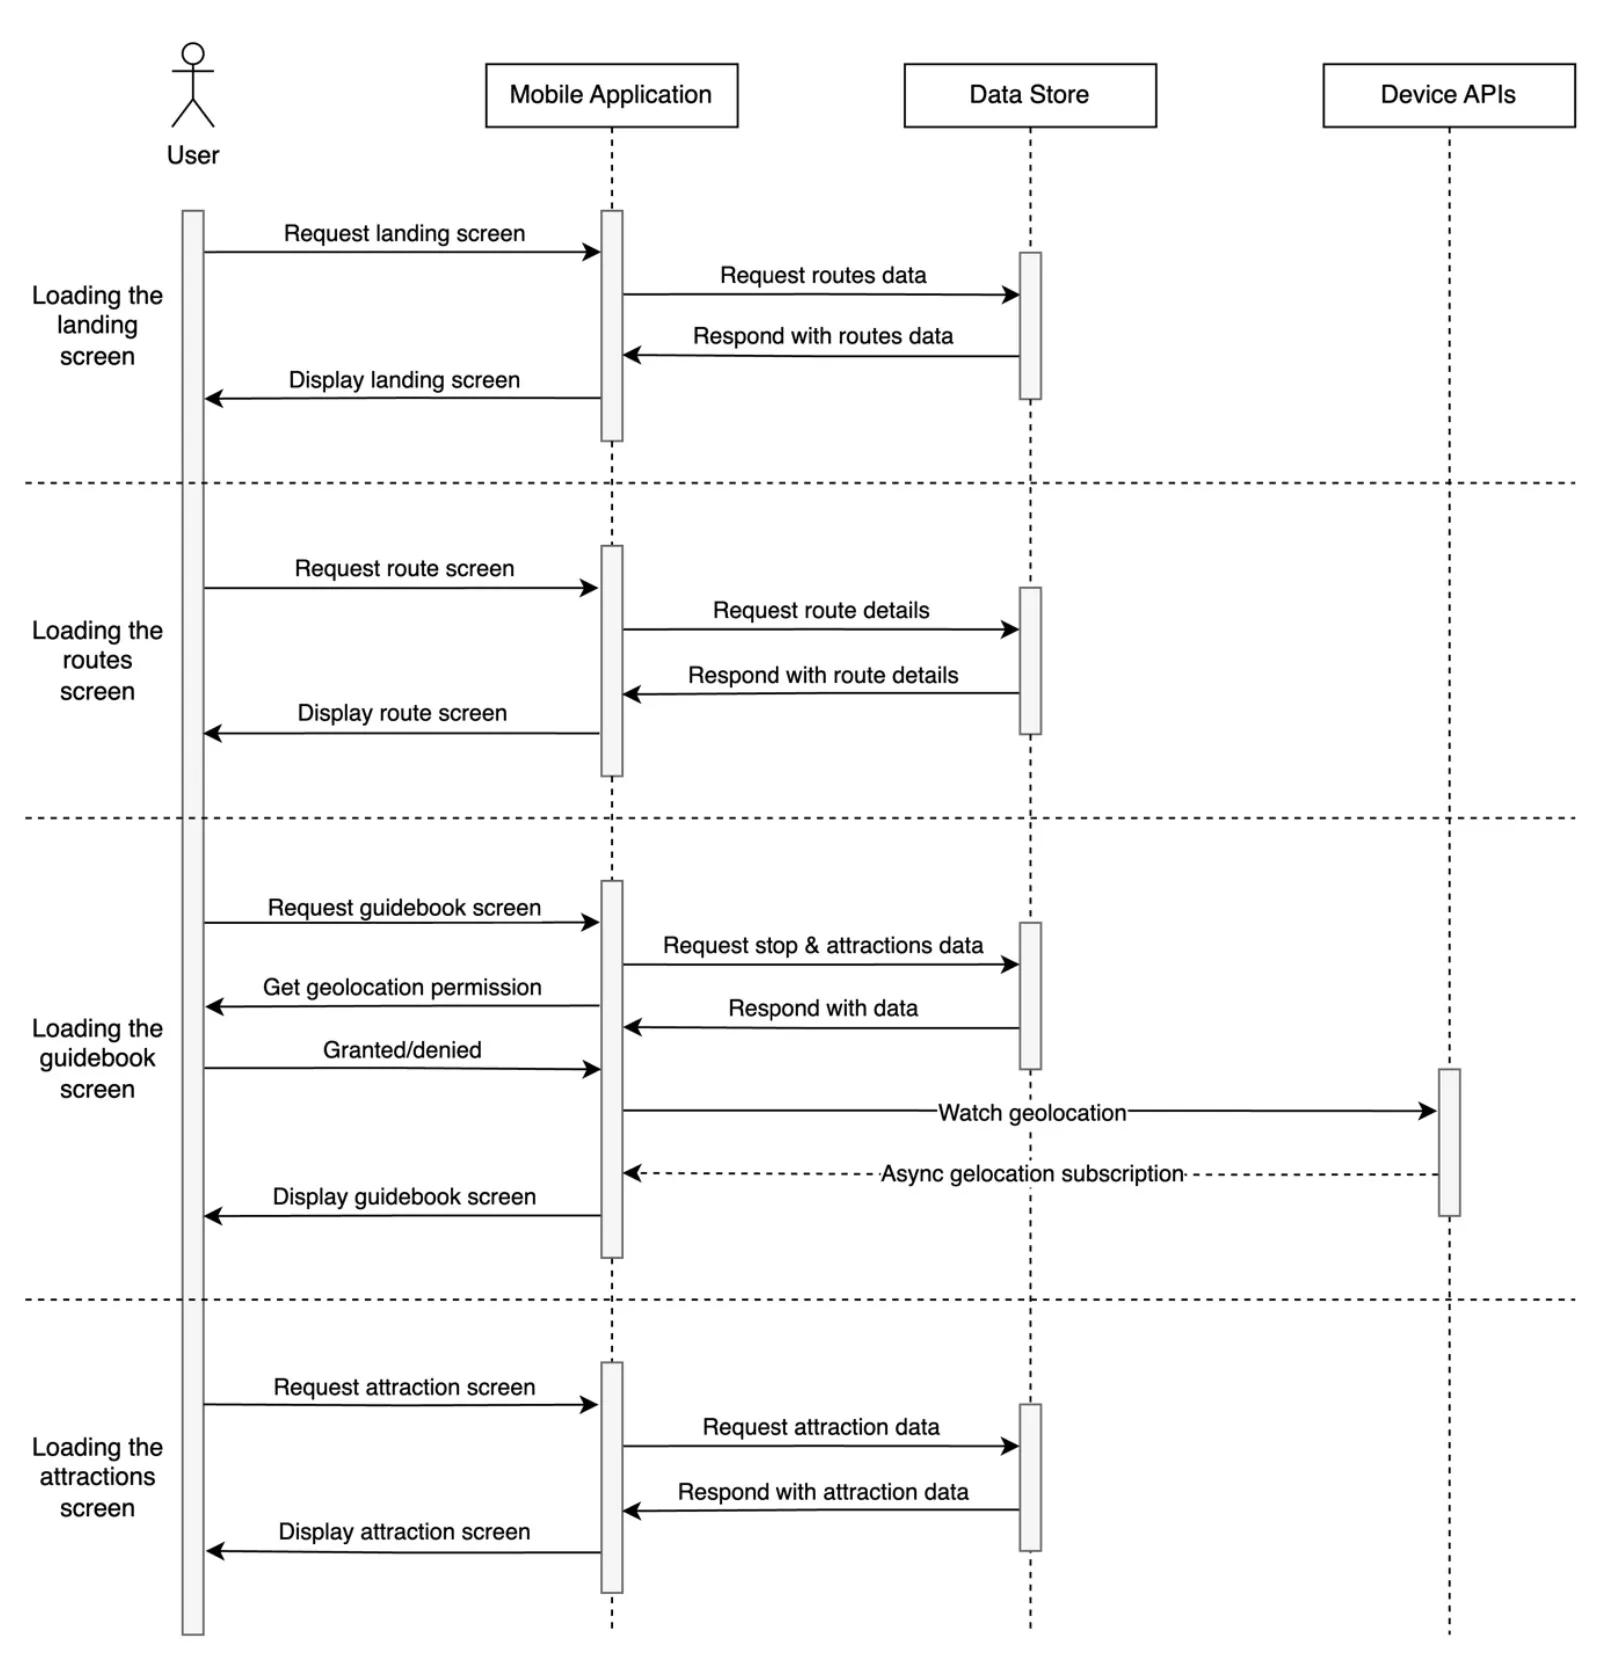 UML sequence diagram of application actions and responses